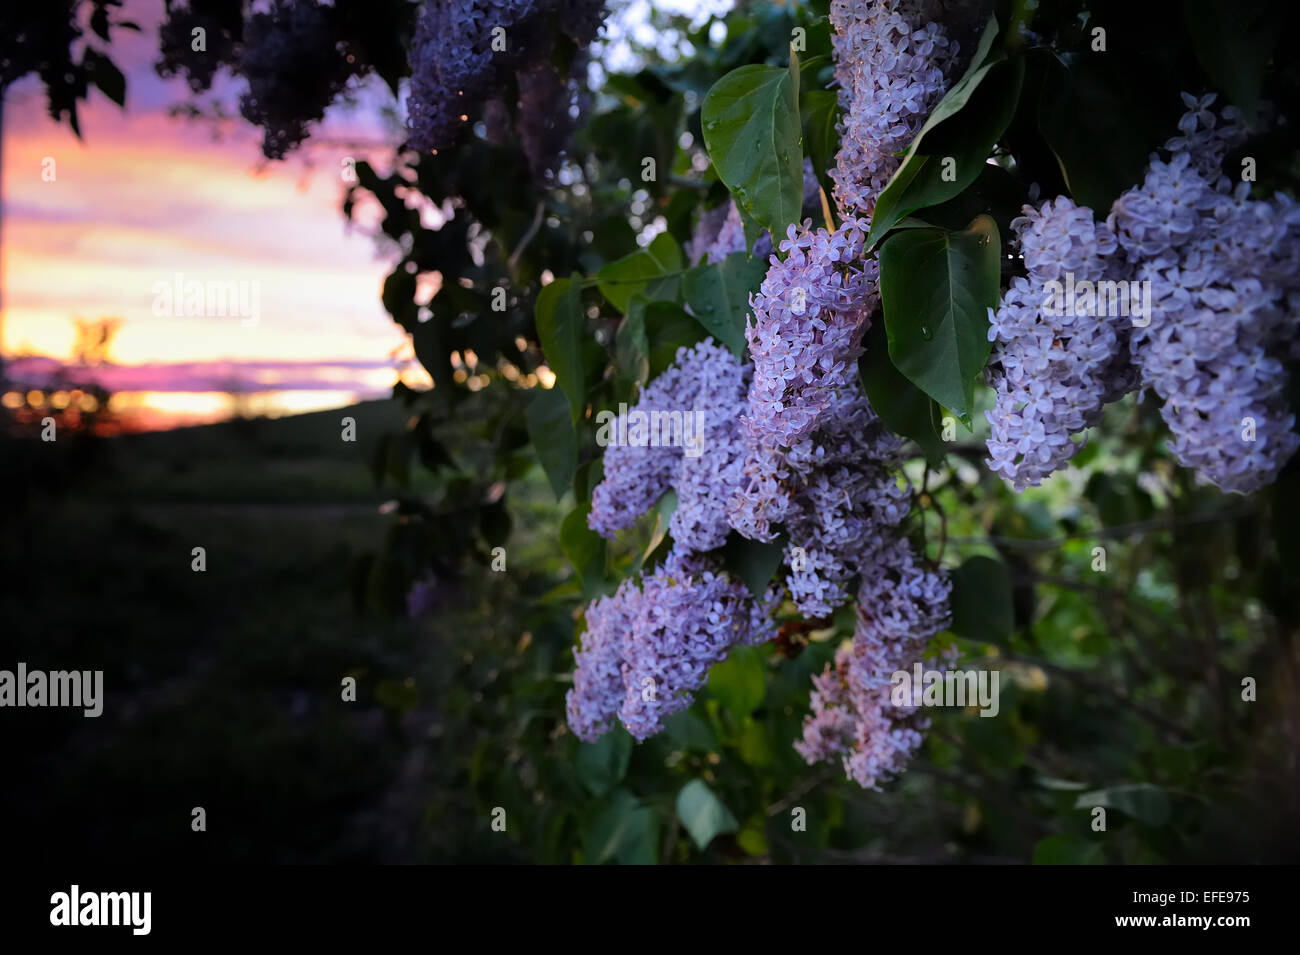 Lilac flowers in evening garden Stock Photo